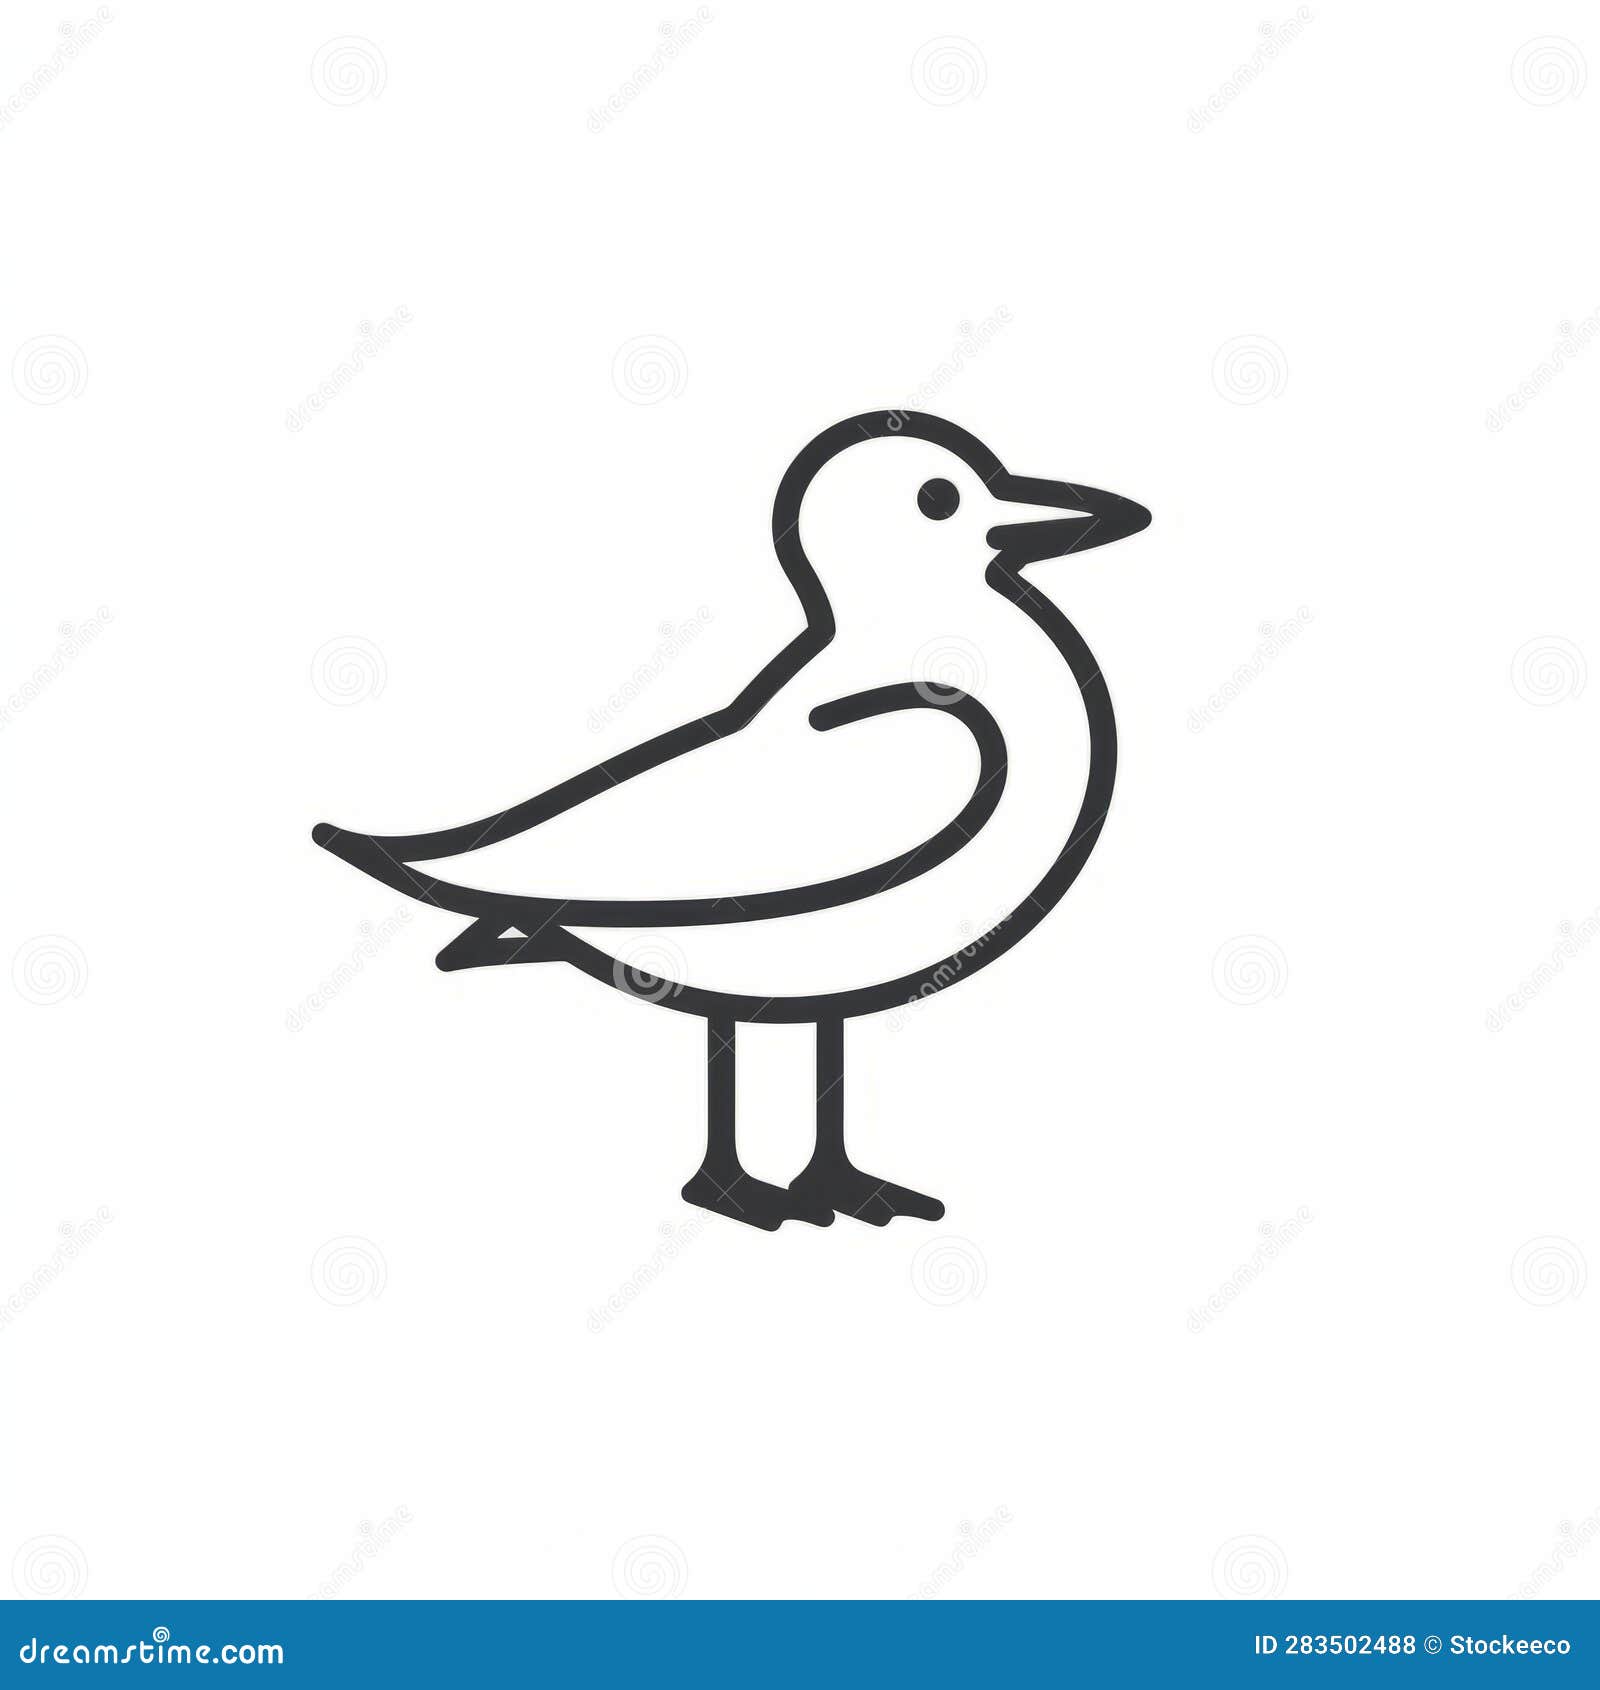 Simple Line Sketch of Seagull Icon in the Style of Daniel Ridgway Knight  Stock Illustration - Illustration of sketch, daniel: 283502488